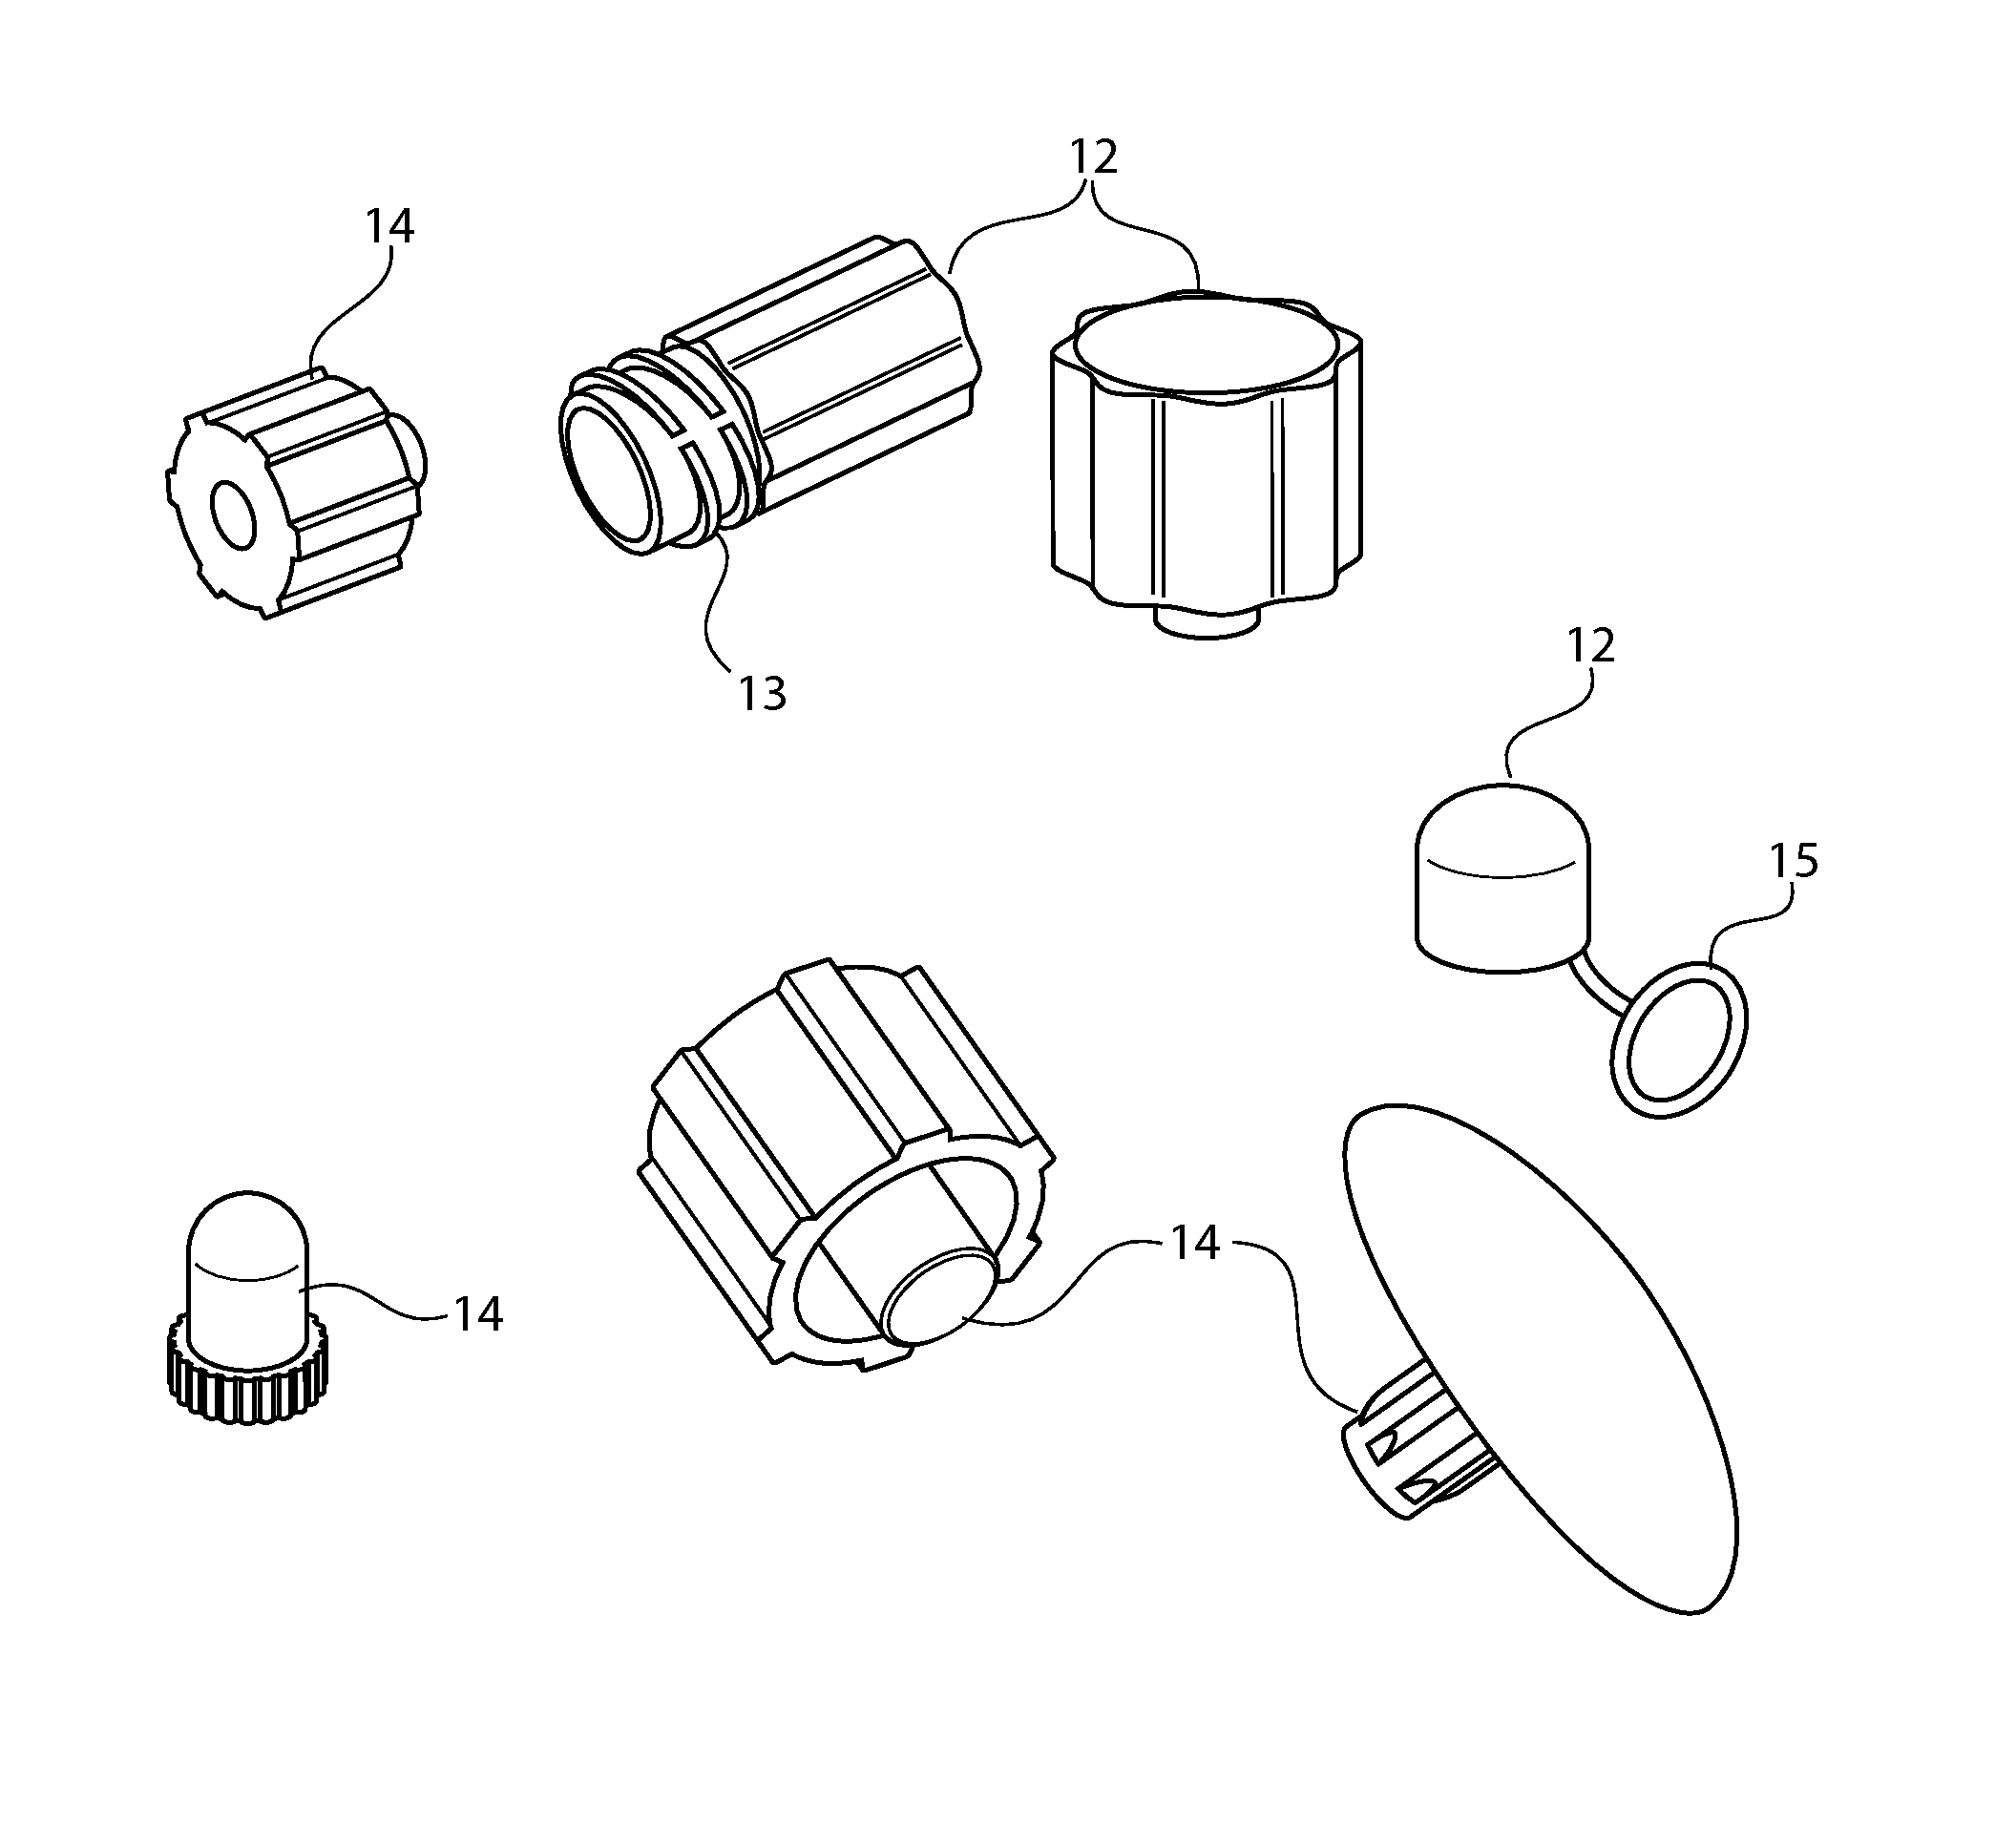 Sintered porous polymeric caps and vents for components of medical devices